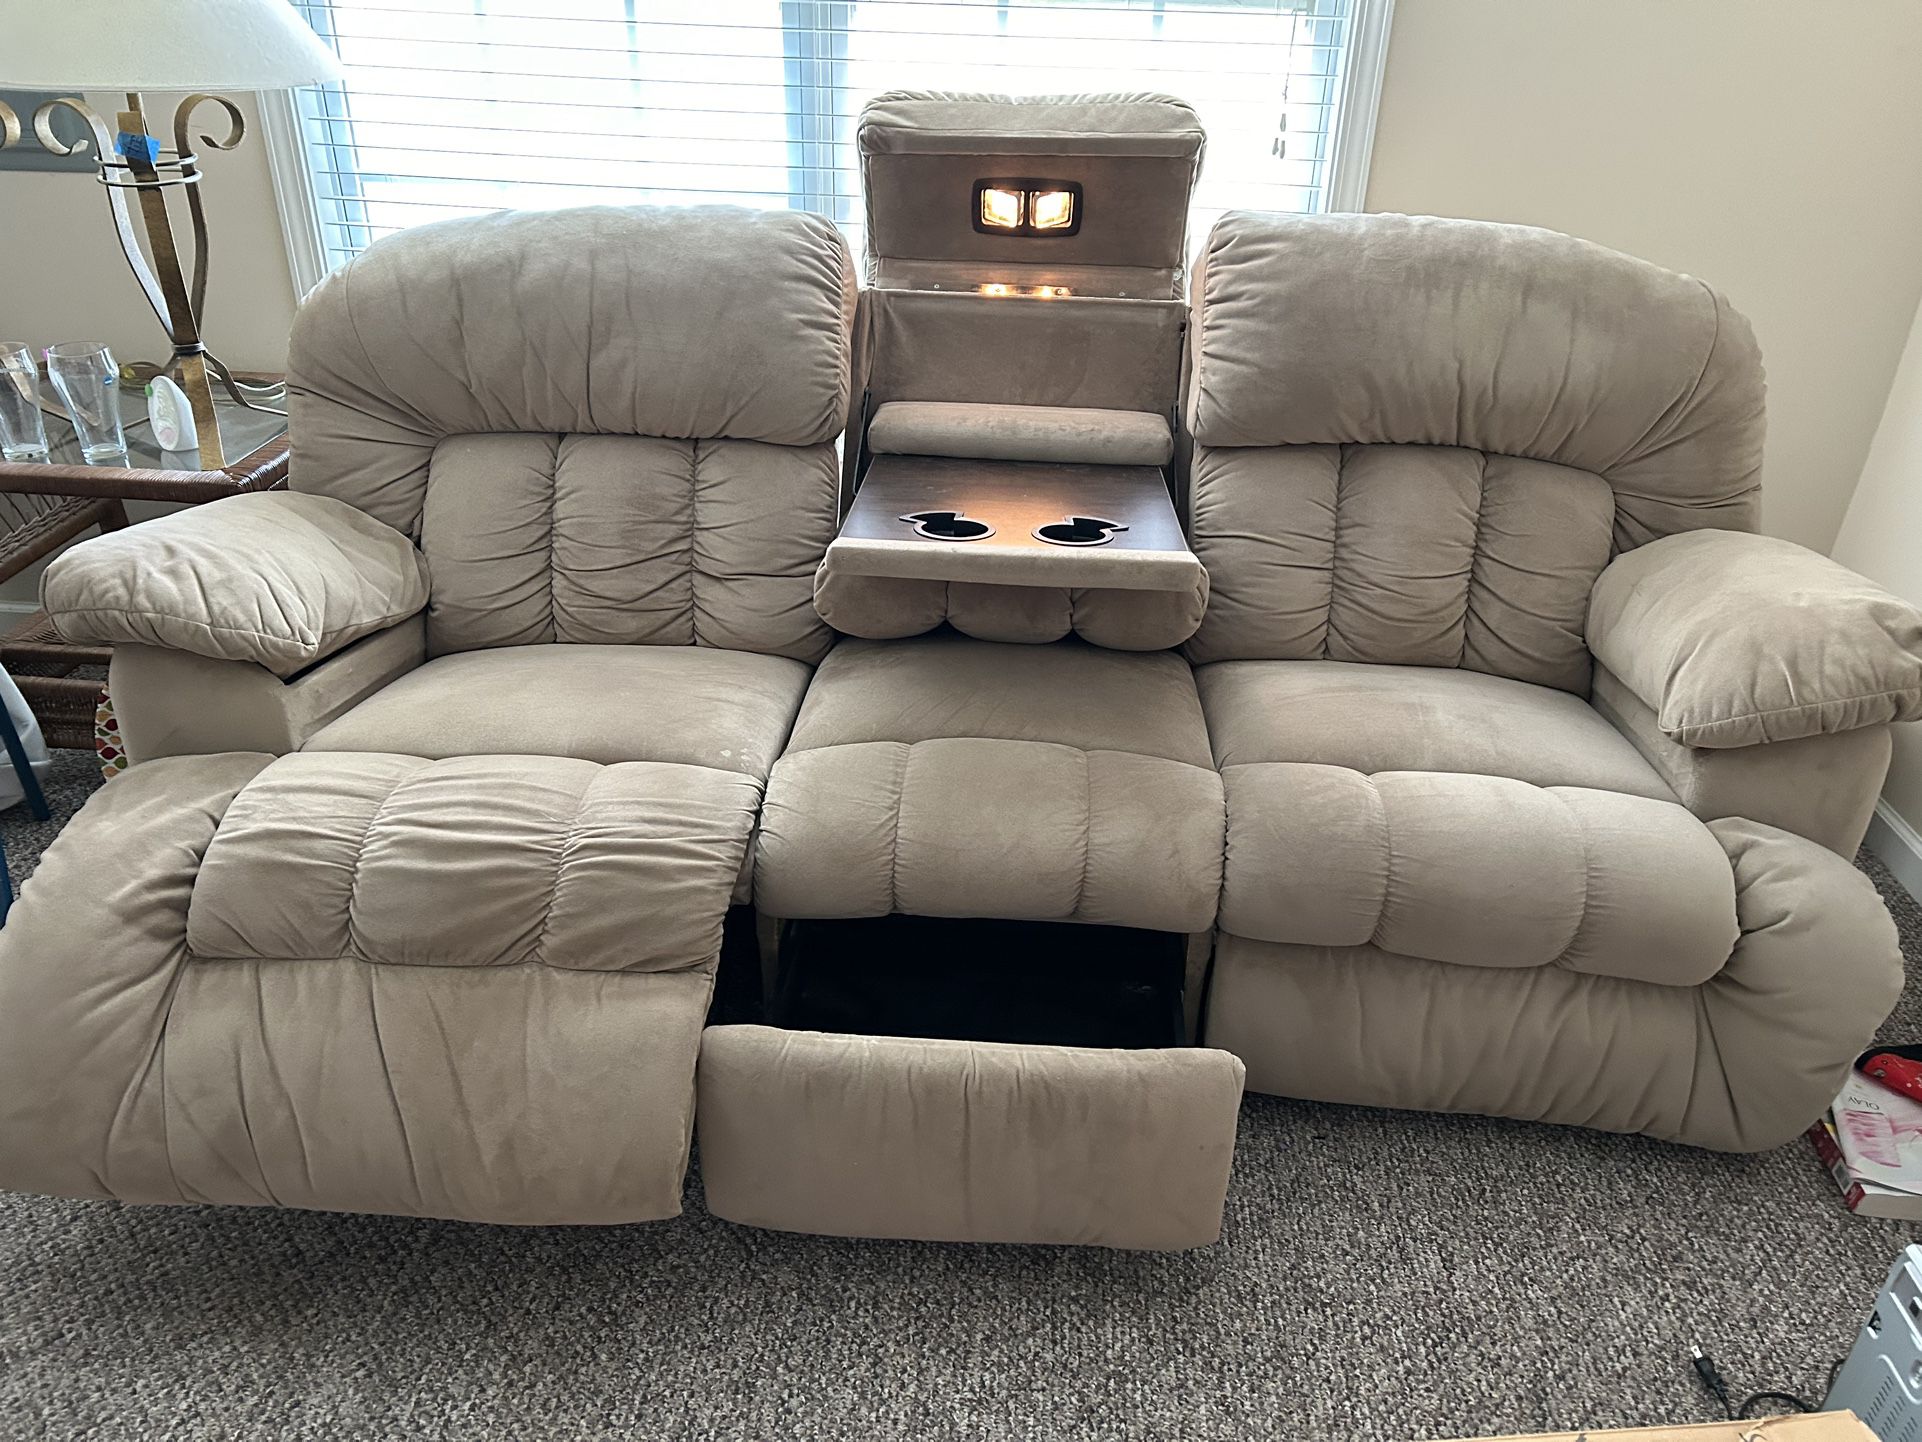 Recliner couch both ends armrest in the middle with lights